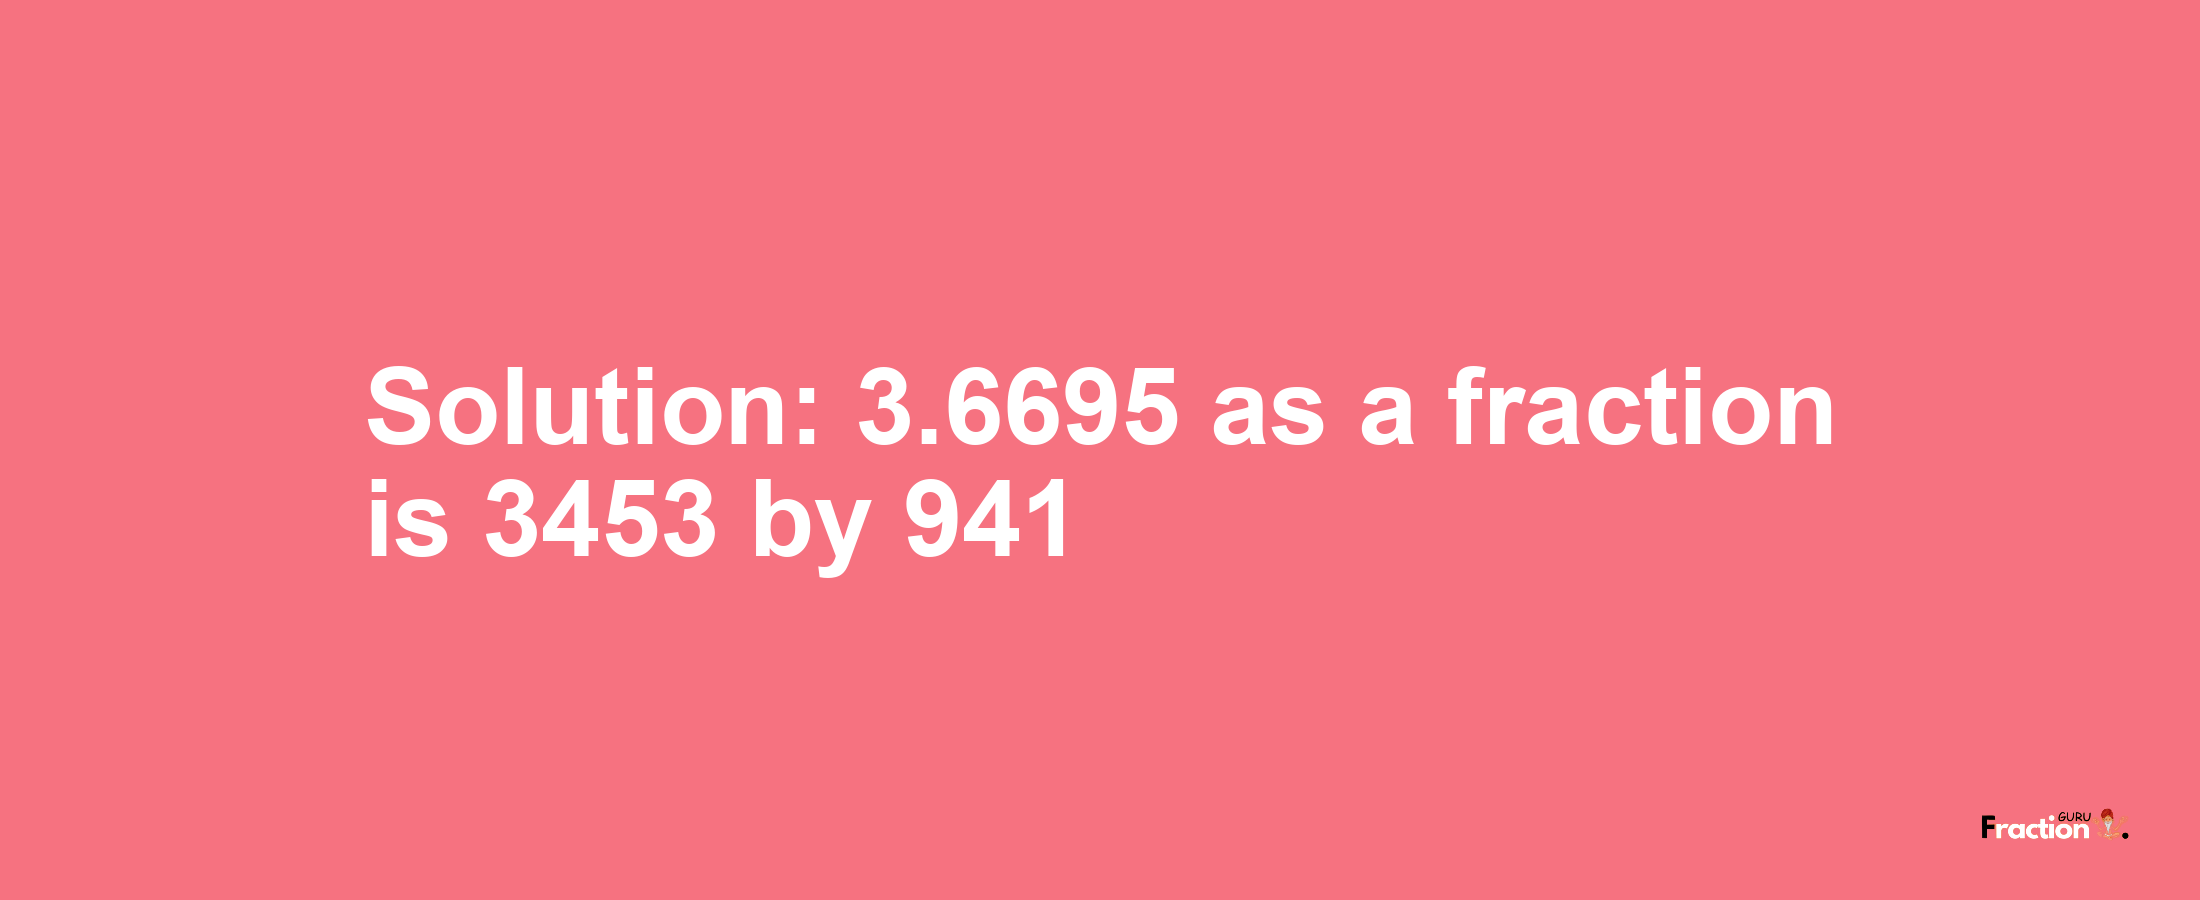 Solution:3.6695 as a fraction is 3453/941